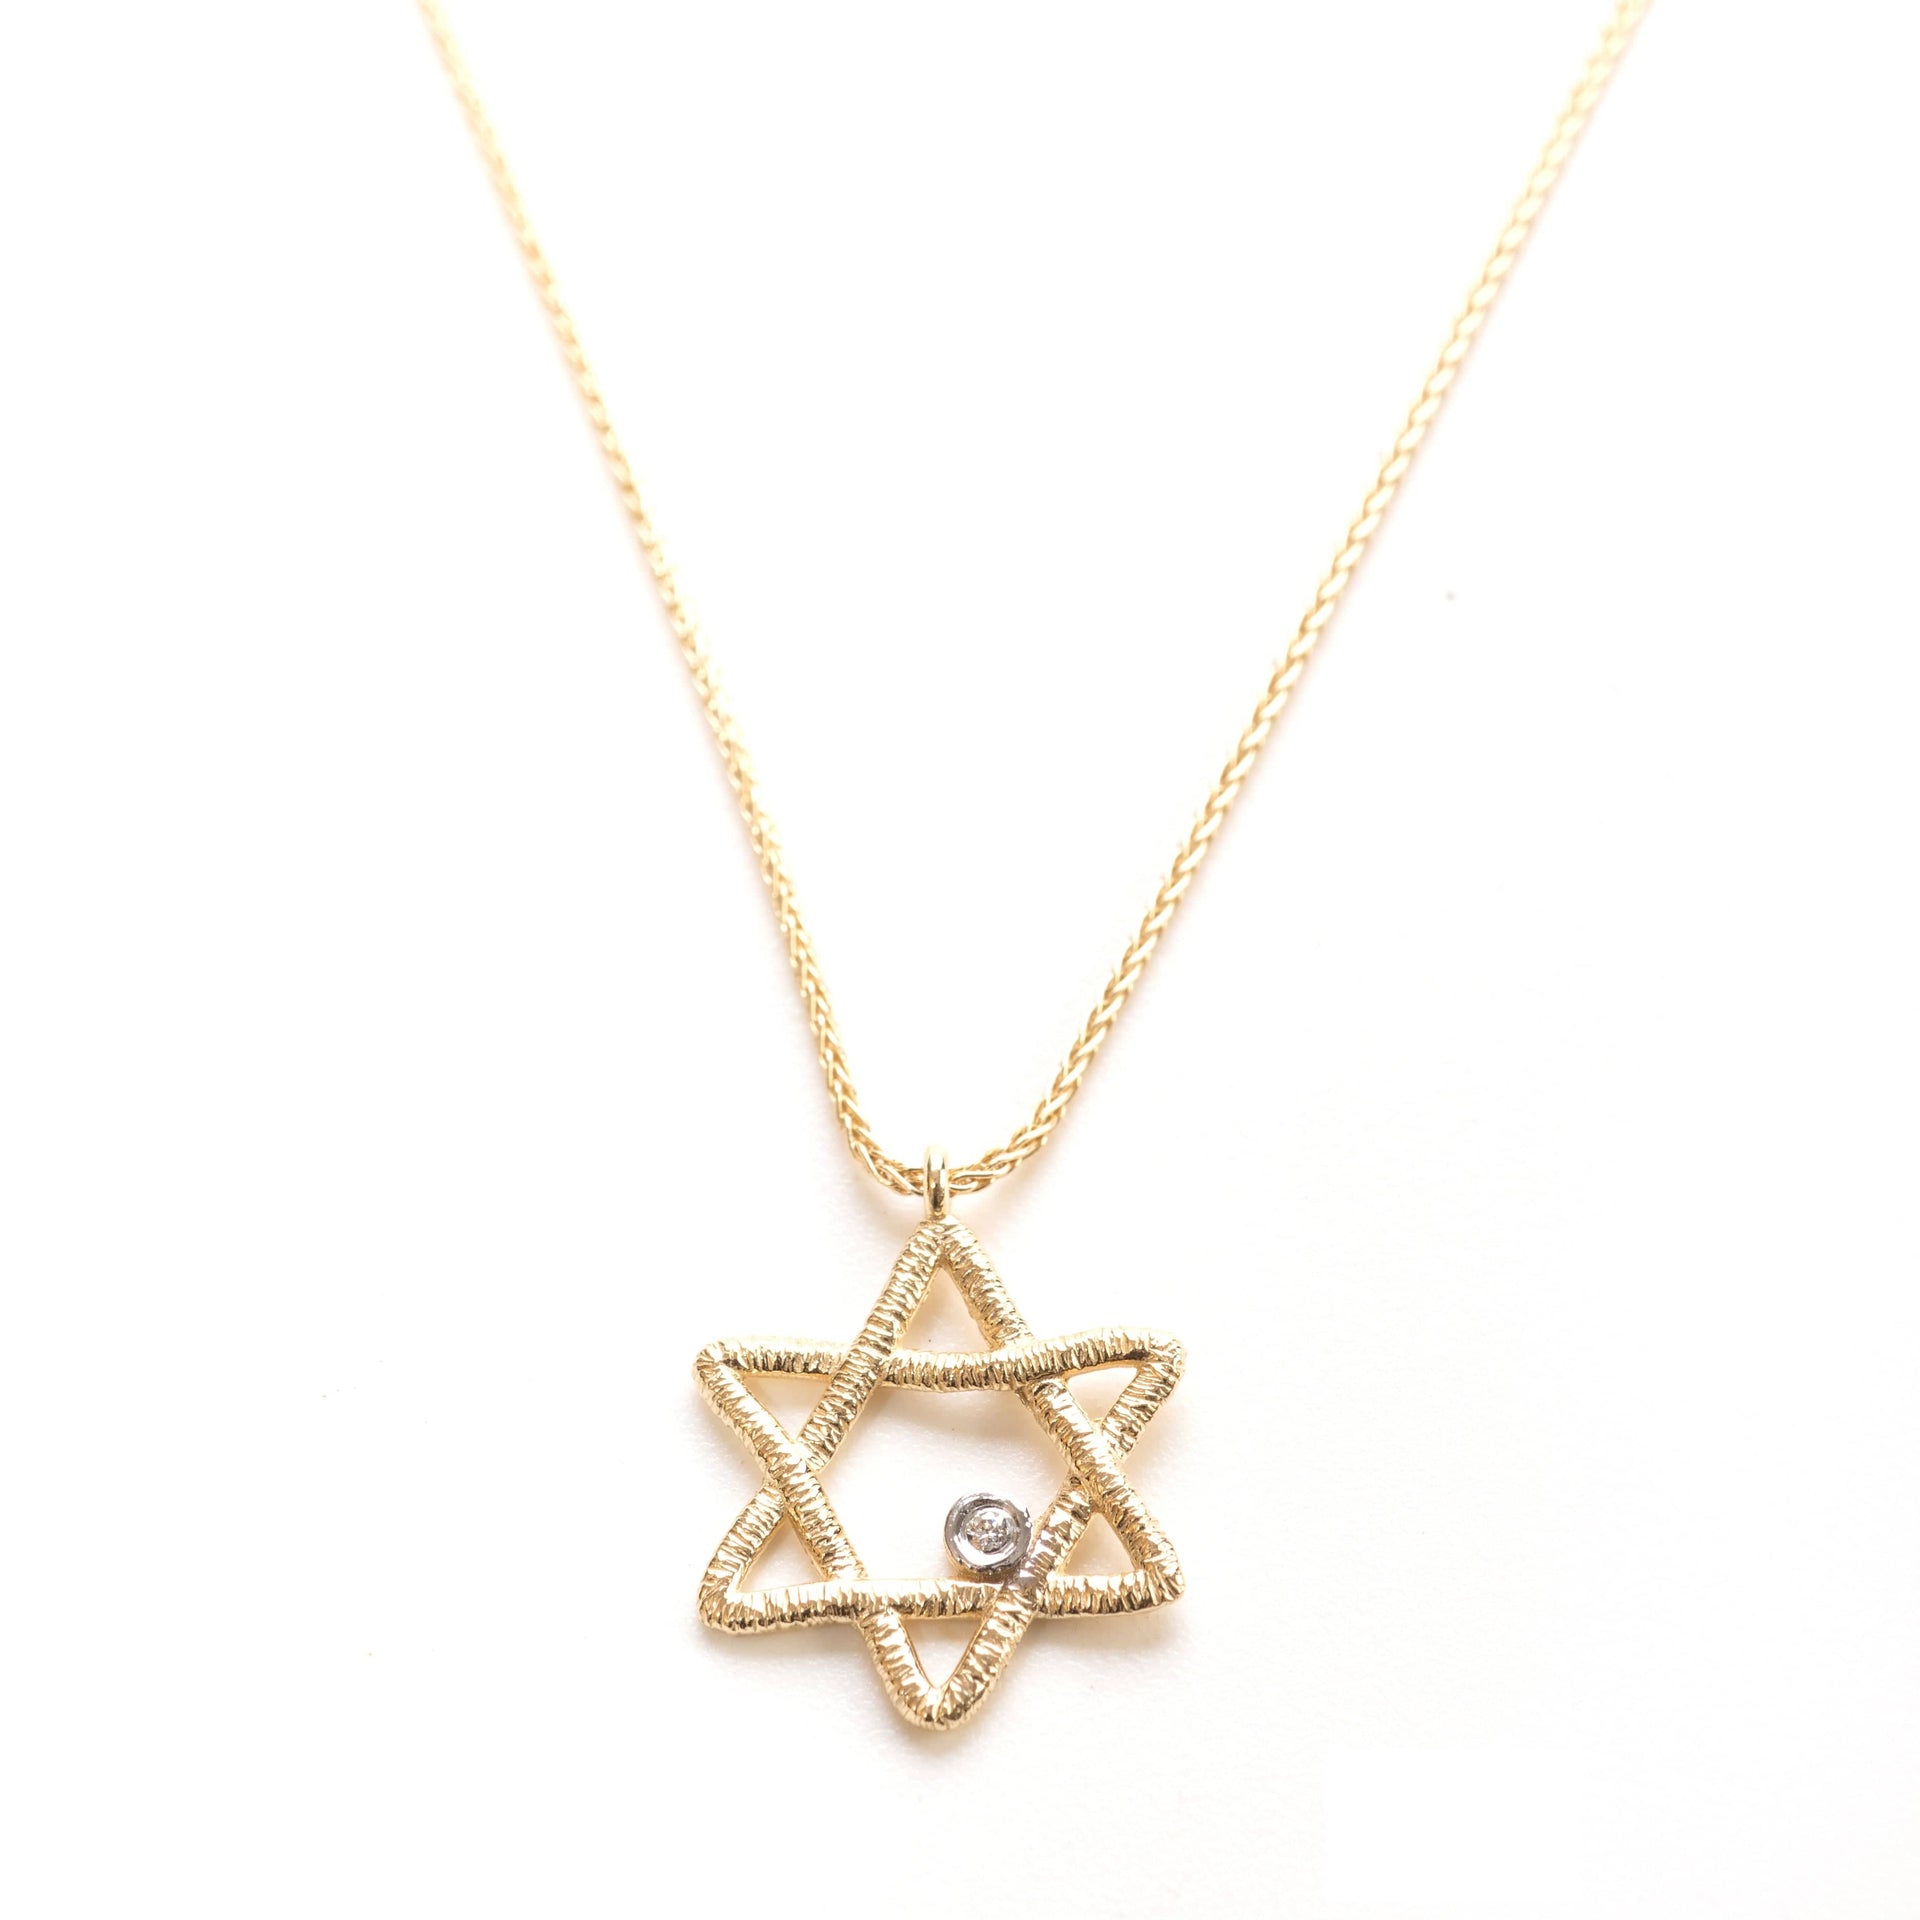 Israel Museum Necklaces Gold 14K Gold Star of David and Diamond Necklace by Israel Museum